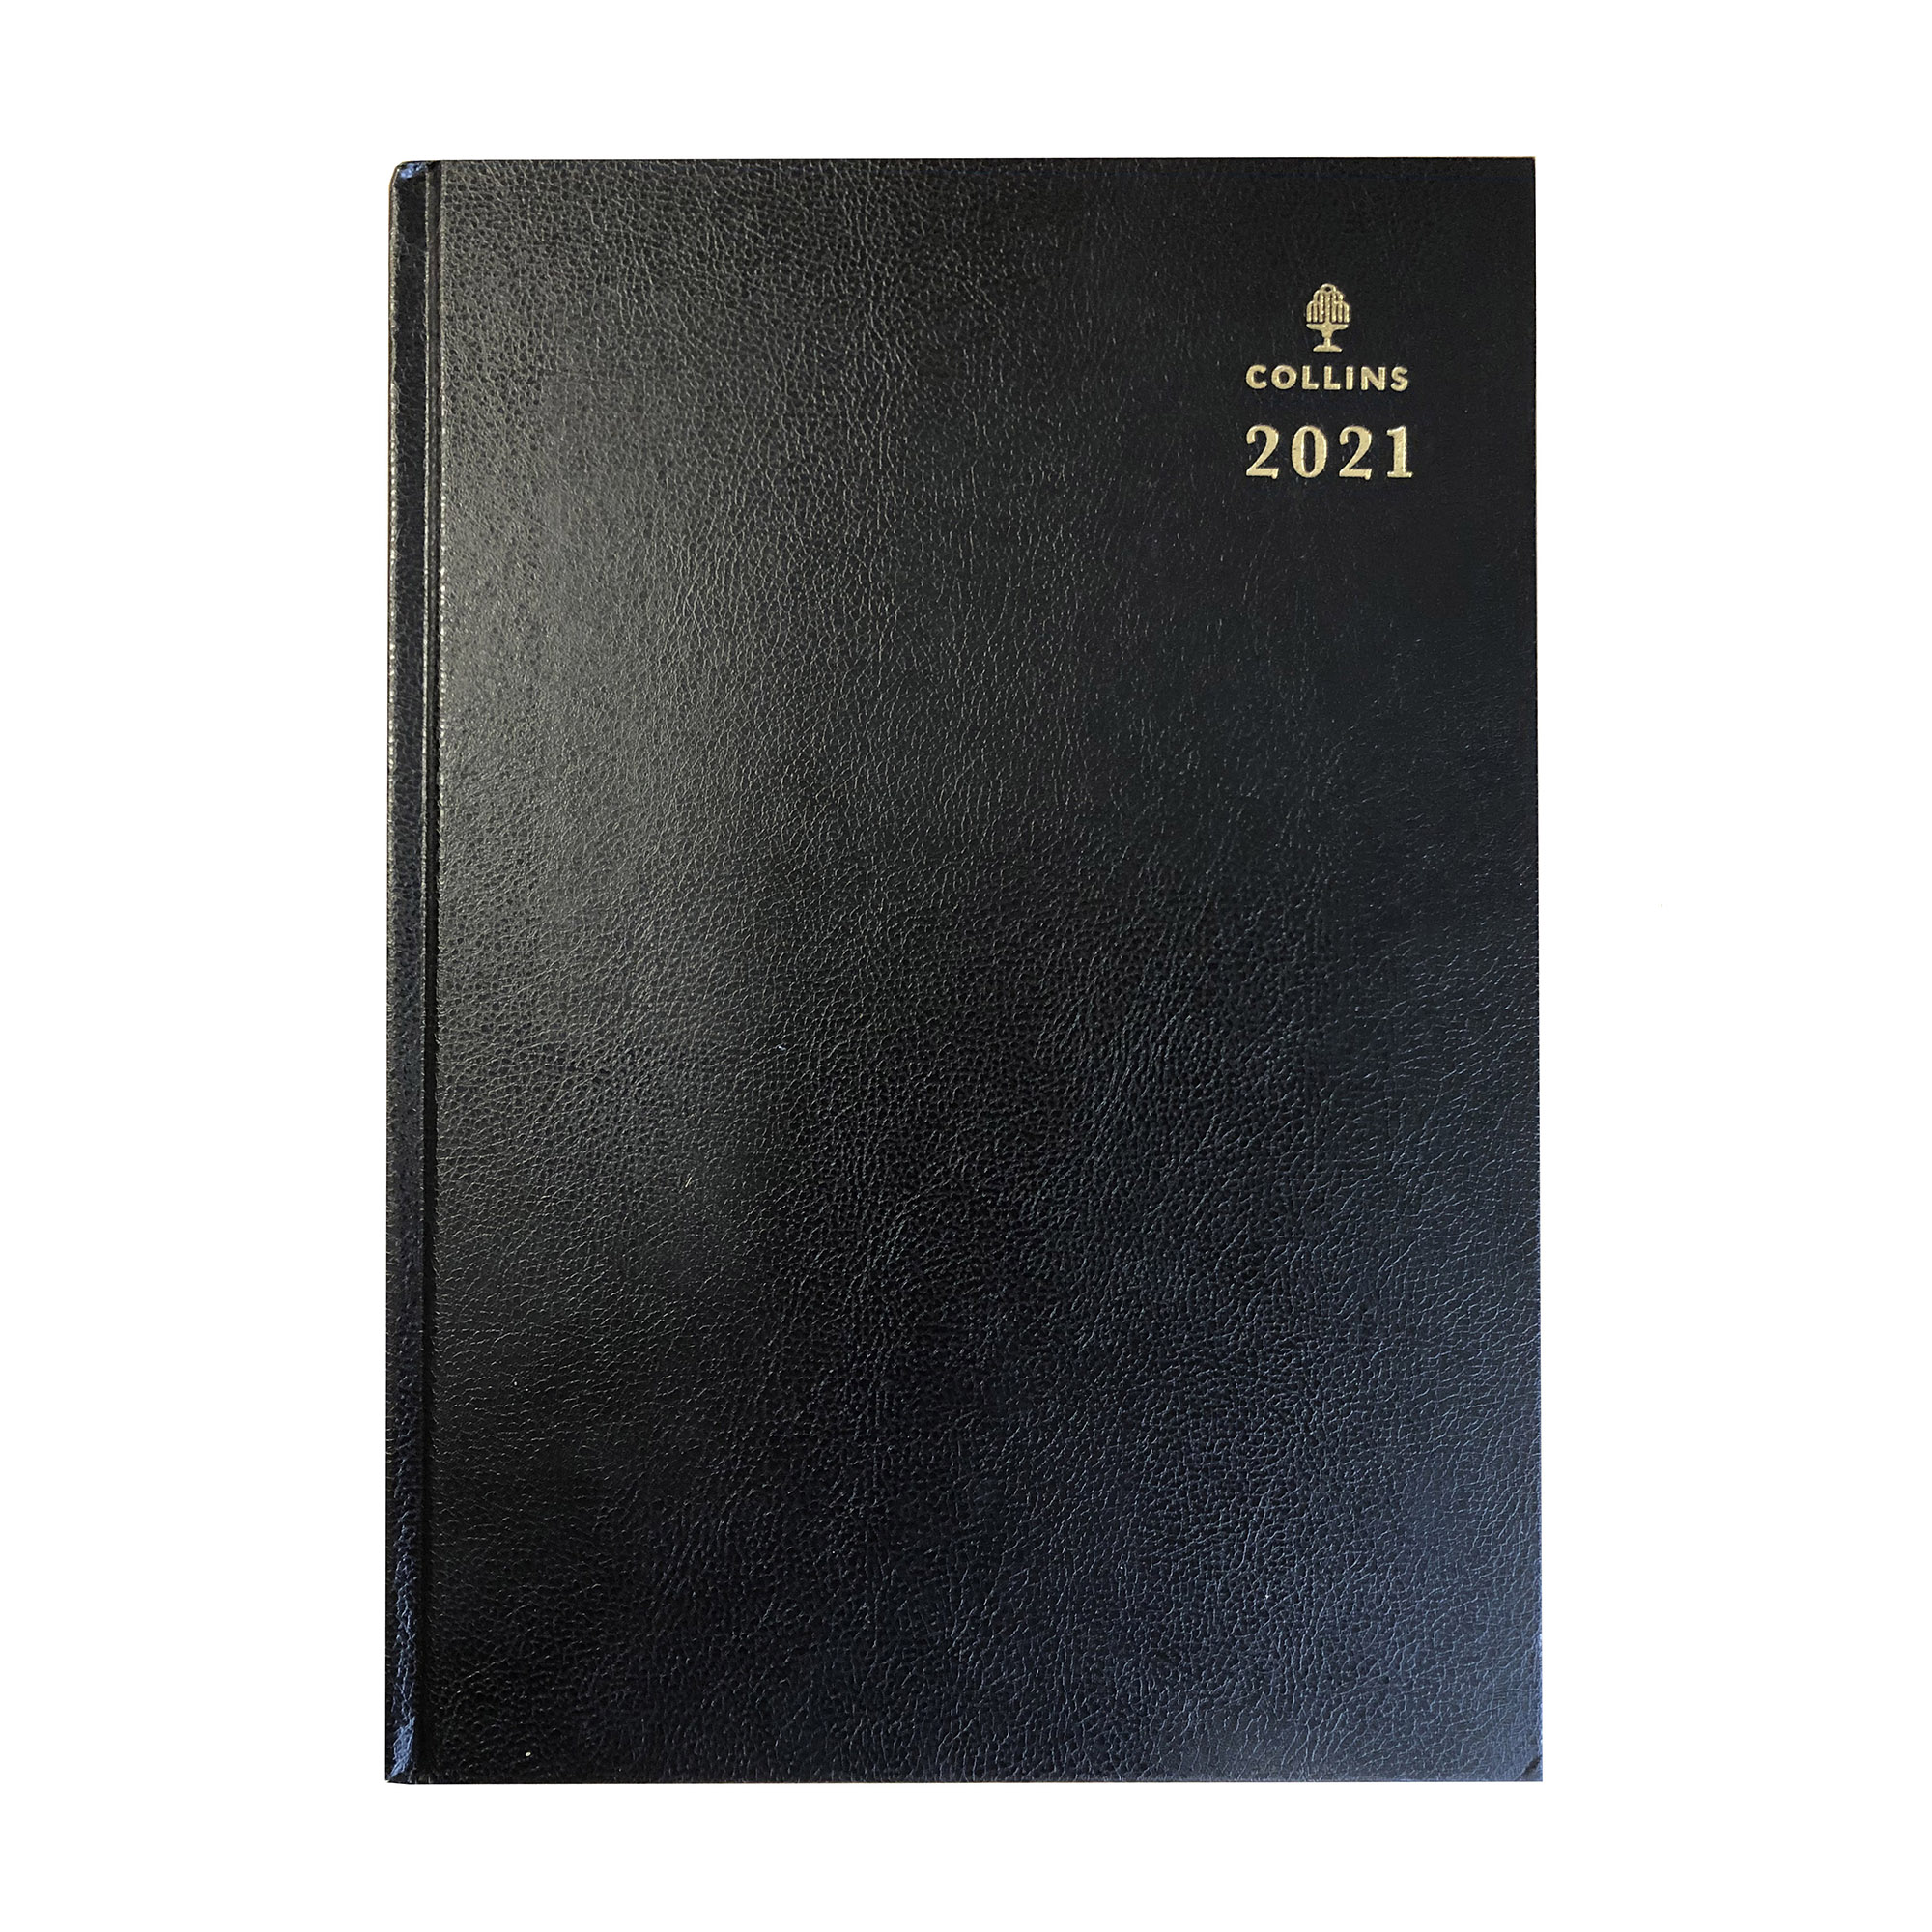 Collins 2021 Desk Diary Day to Page Sewn Binding A4 297x210mm Black Ref 44 Blk 2021